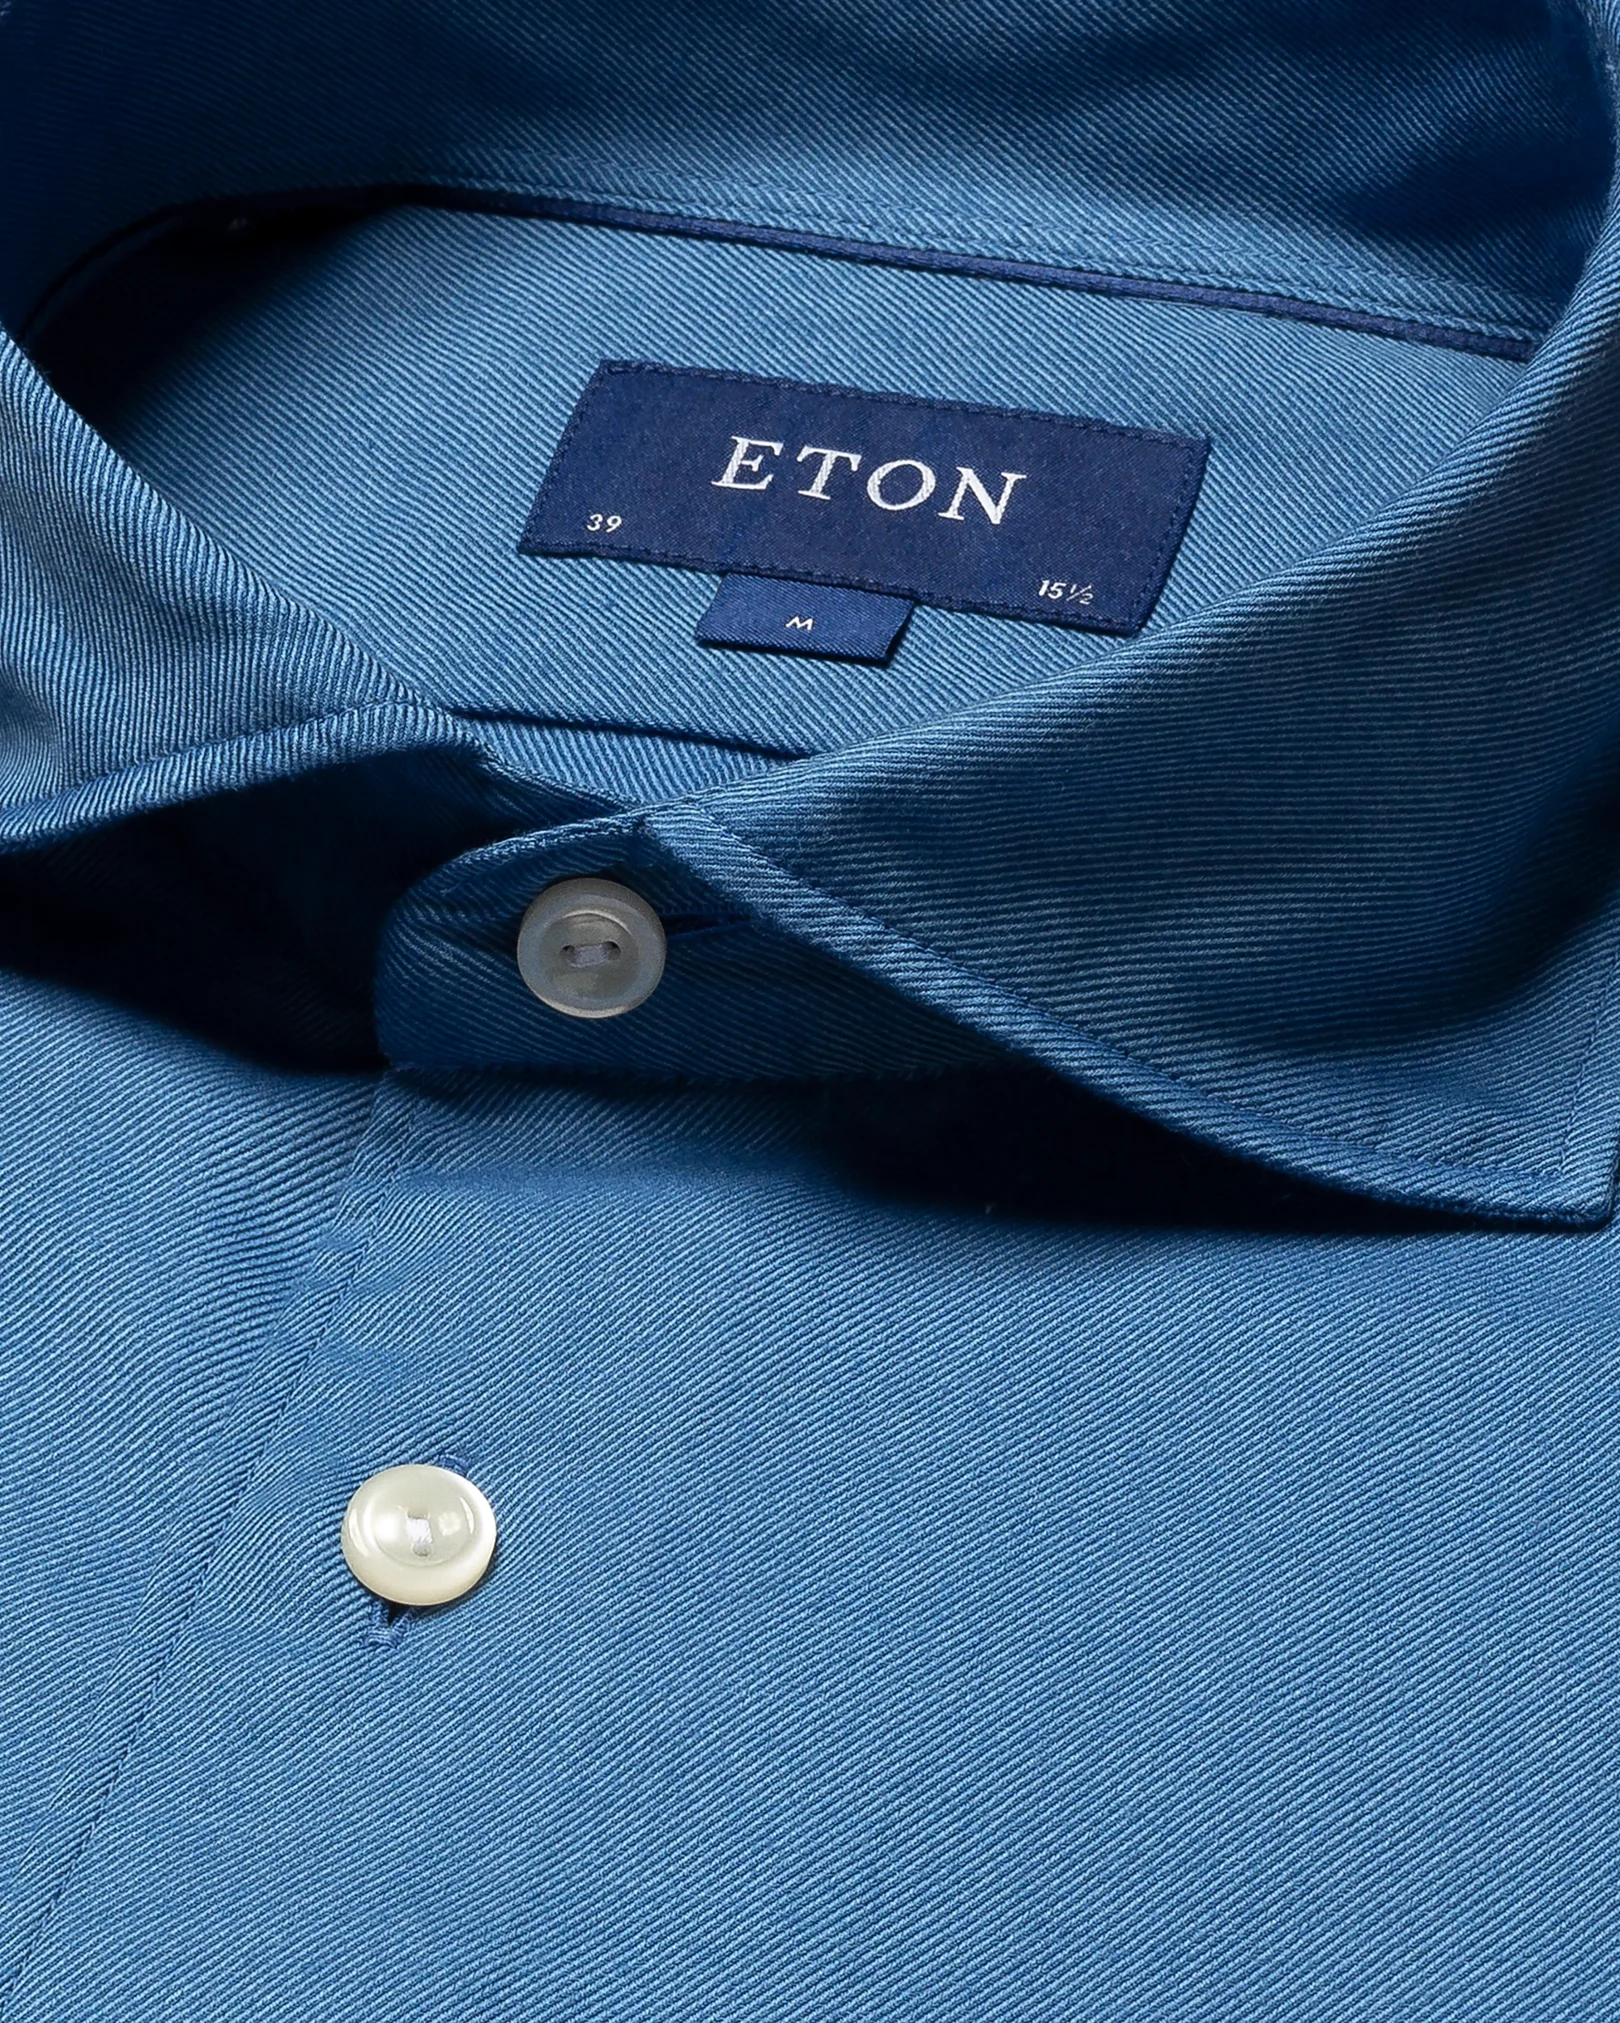 Eton - light blue cotton tencel flannel wide spread single rounded contemporary soft